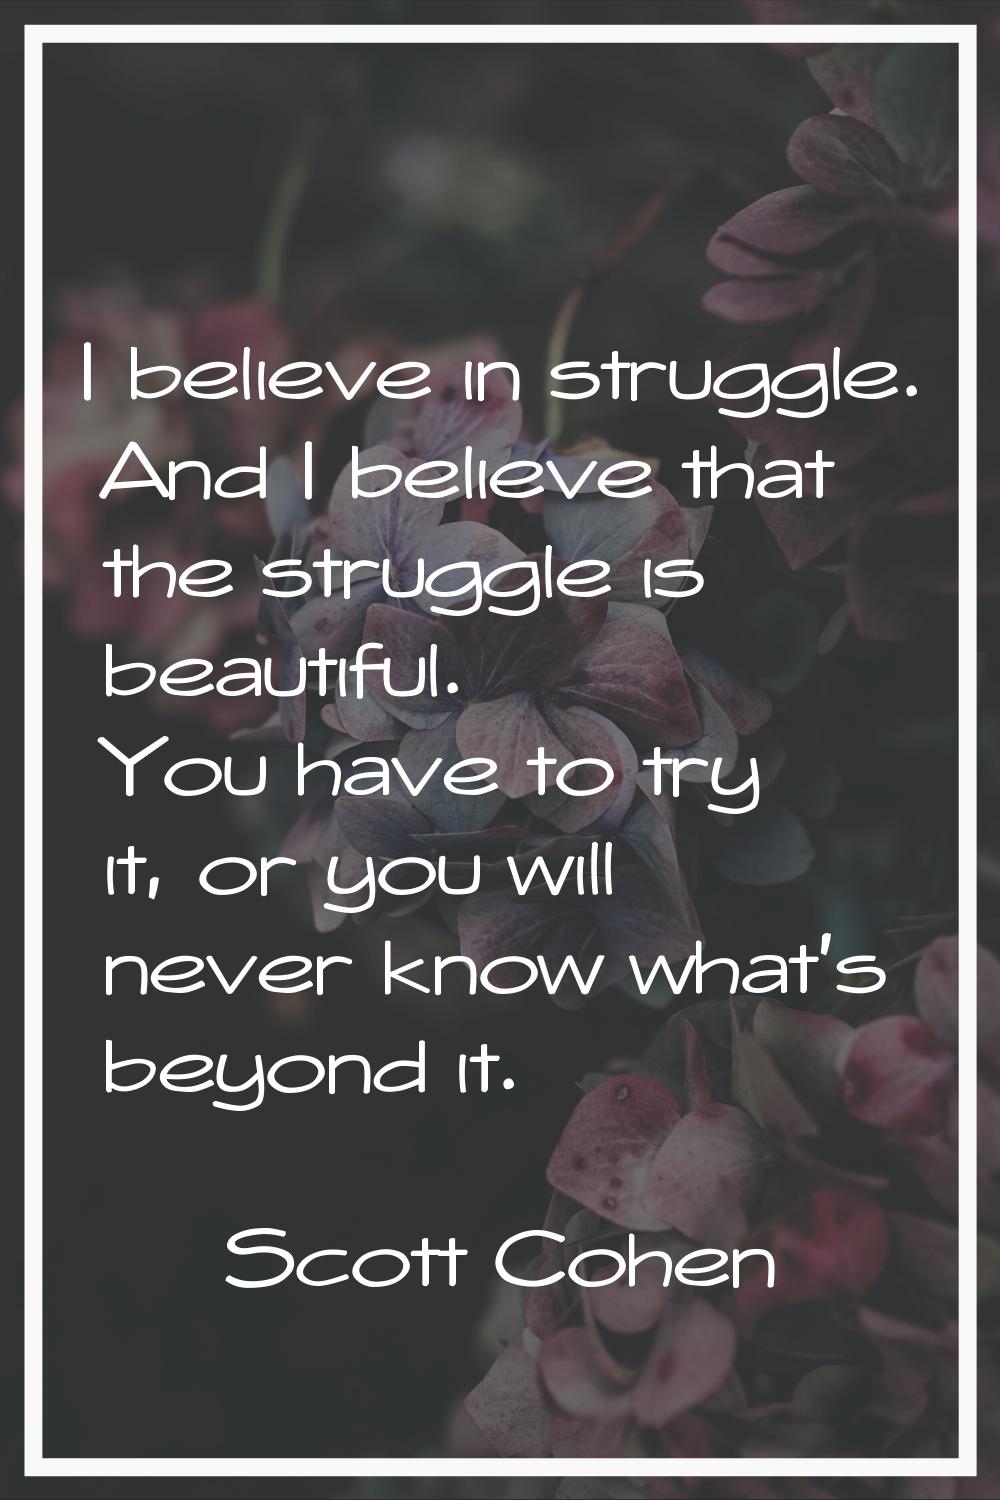 I believe in struggle. And I believe that the struggle is beautiful. You have to try it, or you wil